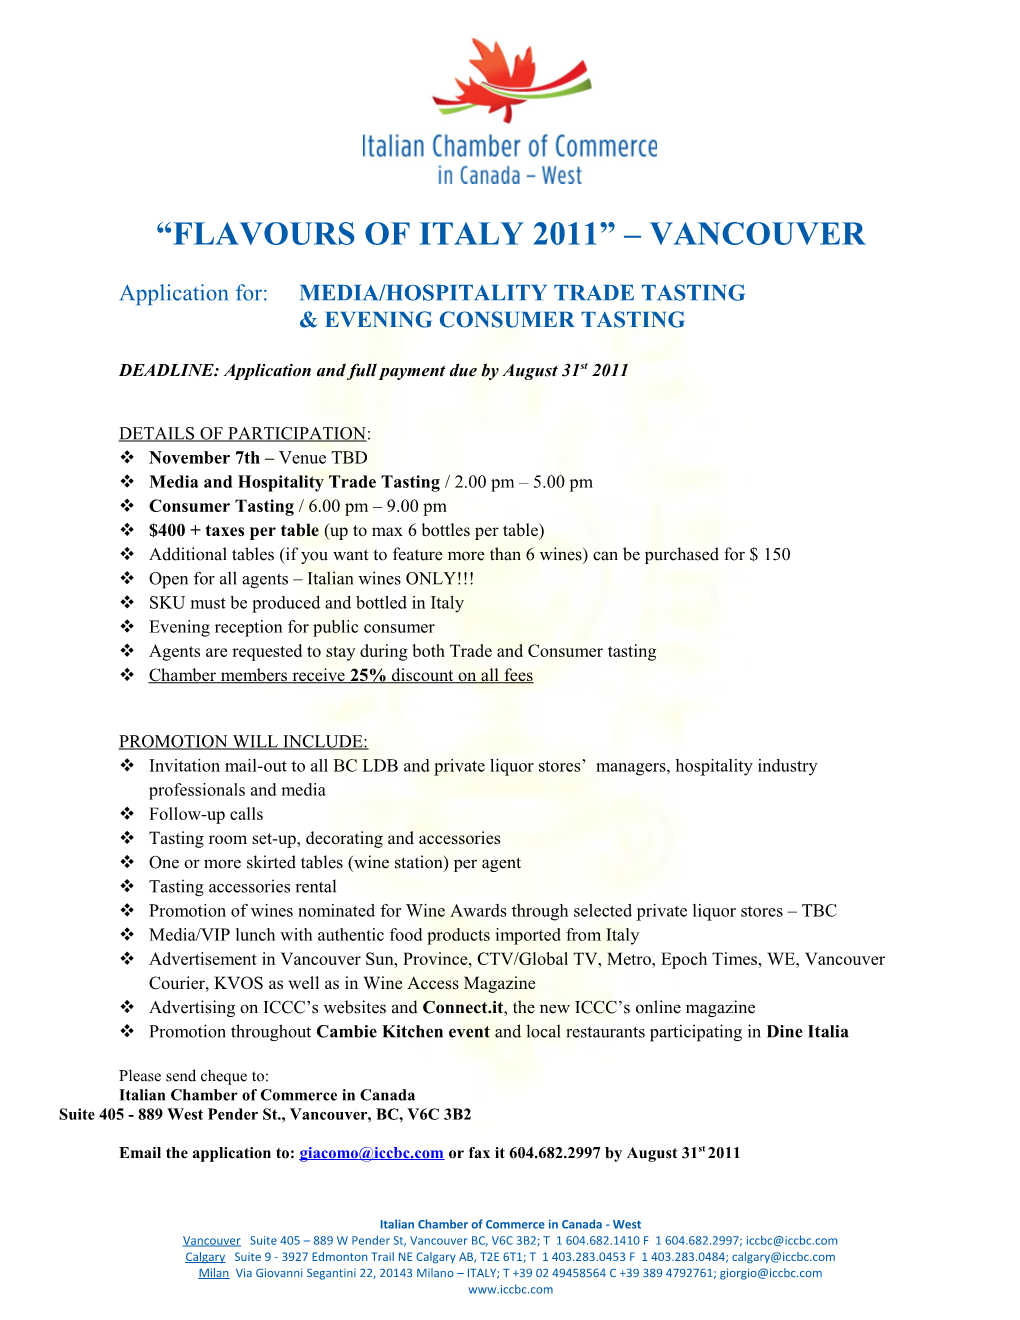 Flavours of Italy 2011 Vancouver